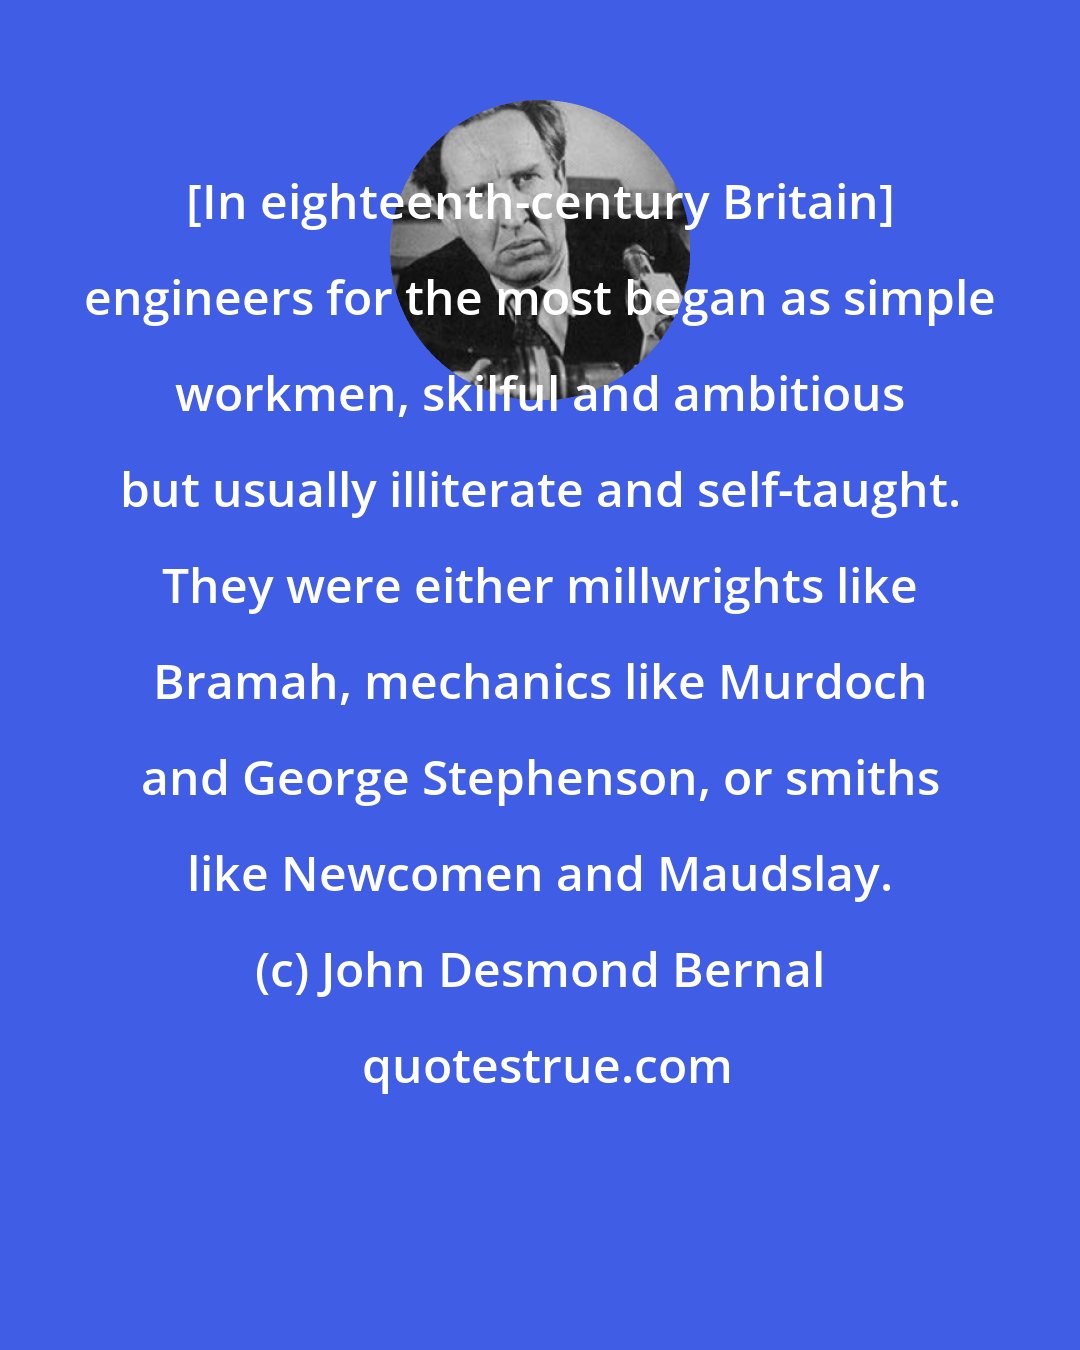 John Desmond Bernal: [In eighteenth-century Britain] engineers for the most began as simple workmen, skilful and ambitious but usually illiterate and self-taught. They were either millwrights like Bramah, mechanics like Murdoch and George Stephenson, or smiths like Newcomen and Maudslay.